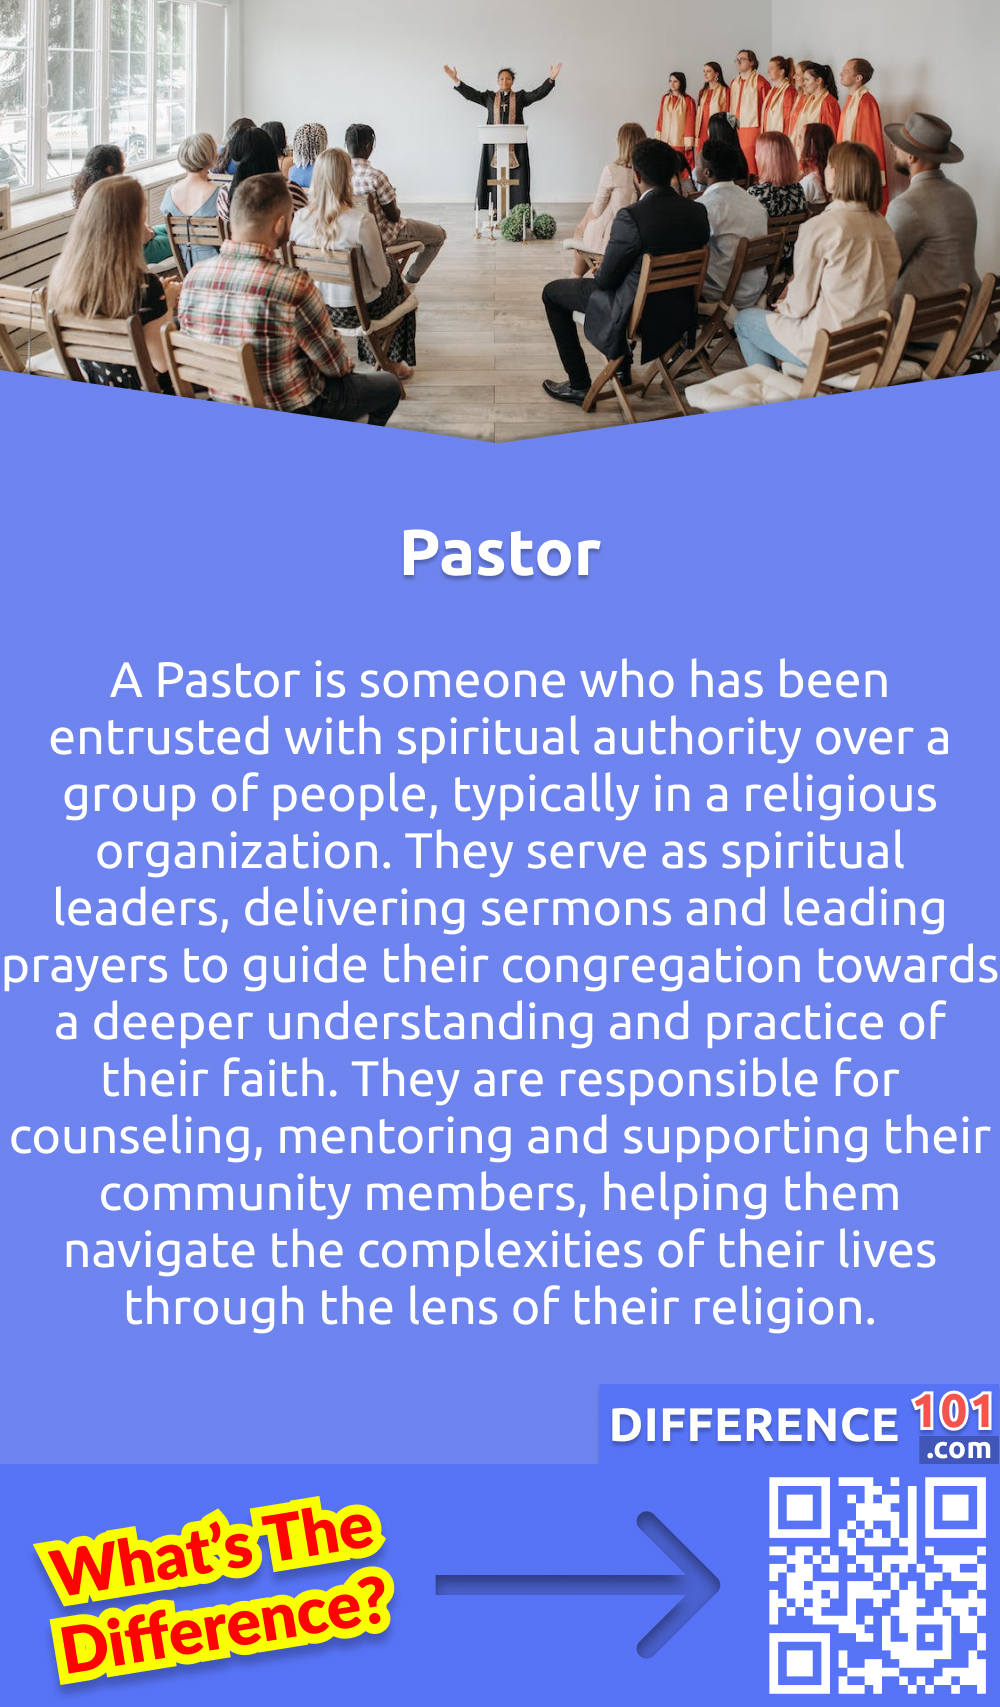 What Is Pastor? A Pastor is someone who has been entrusted with spiritual authority over a group of people, typically in a religious organization. They serve as spiritual leaders, delivering sermons and leading prayers to guide their congregation towards a deeper understanding and practice of their faith. They are responsible for counseling, mentoring and supporting their community members, helping them navigate the complexities of their lives through the lens of their religion. The role of a Pastor is multifaceted and demanding, requiring strong leadership skills, deep knowledge of religious doctrine, empathy and compassion, and an unwavering commitment to their faith and their community. Their work is a vital part of spiritual life, providing guidance and direction to those who seek to lead a life of meaning and purpose.